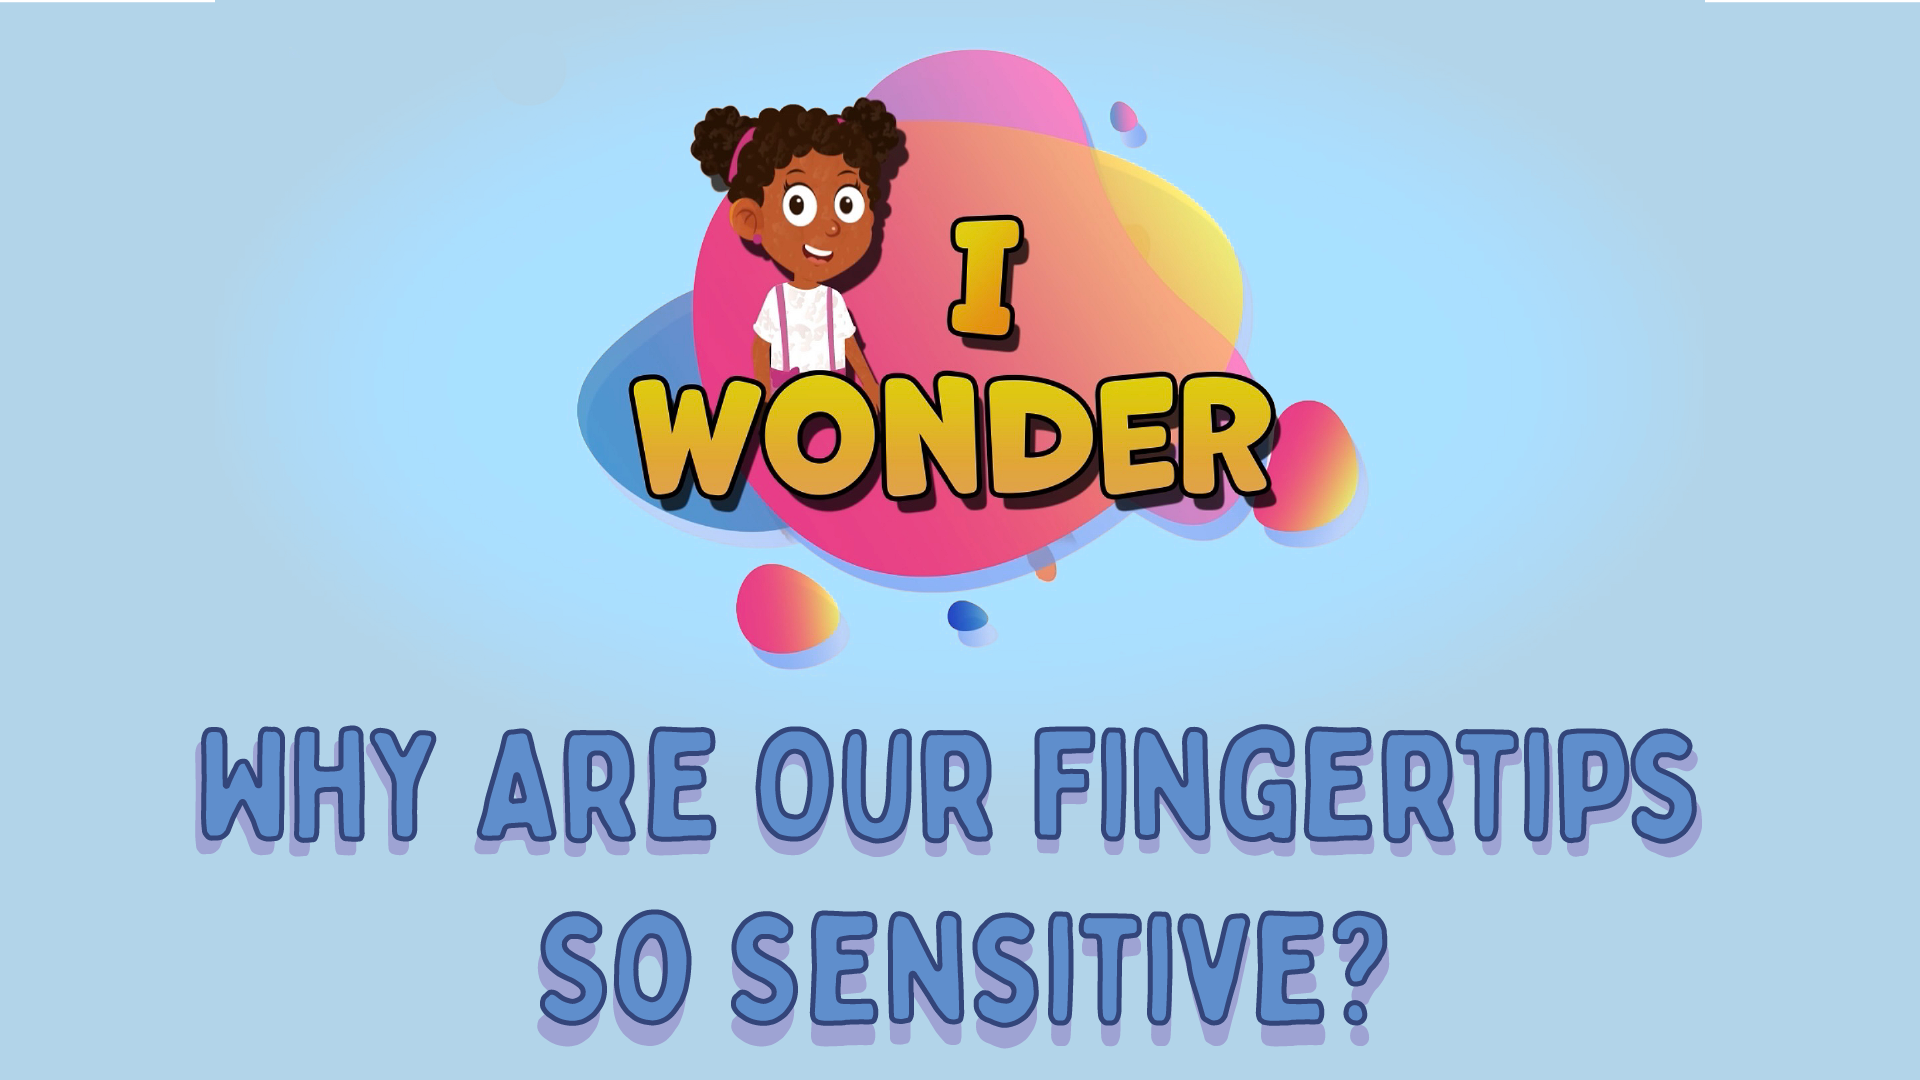 Why Are Our Fingertips So Sensitive?